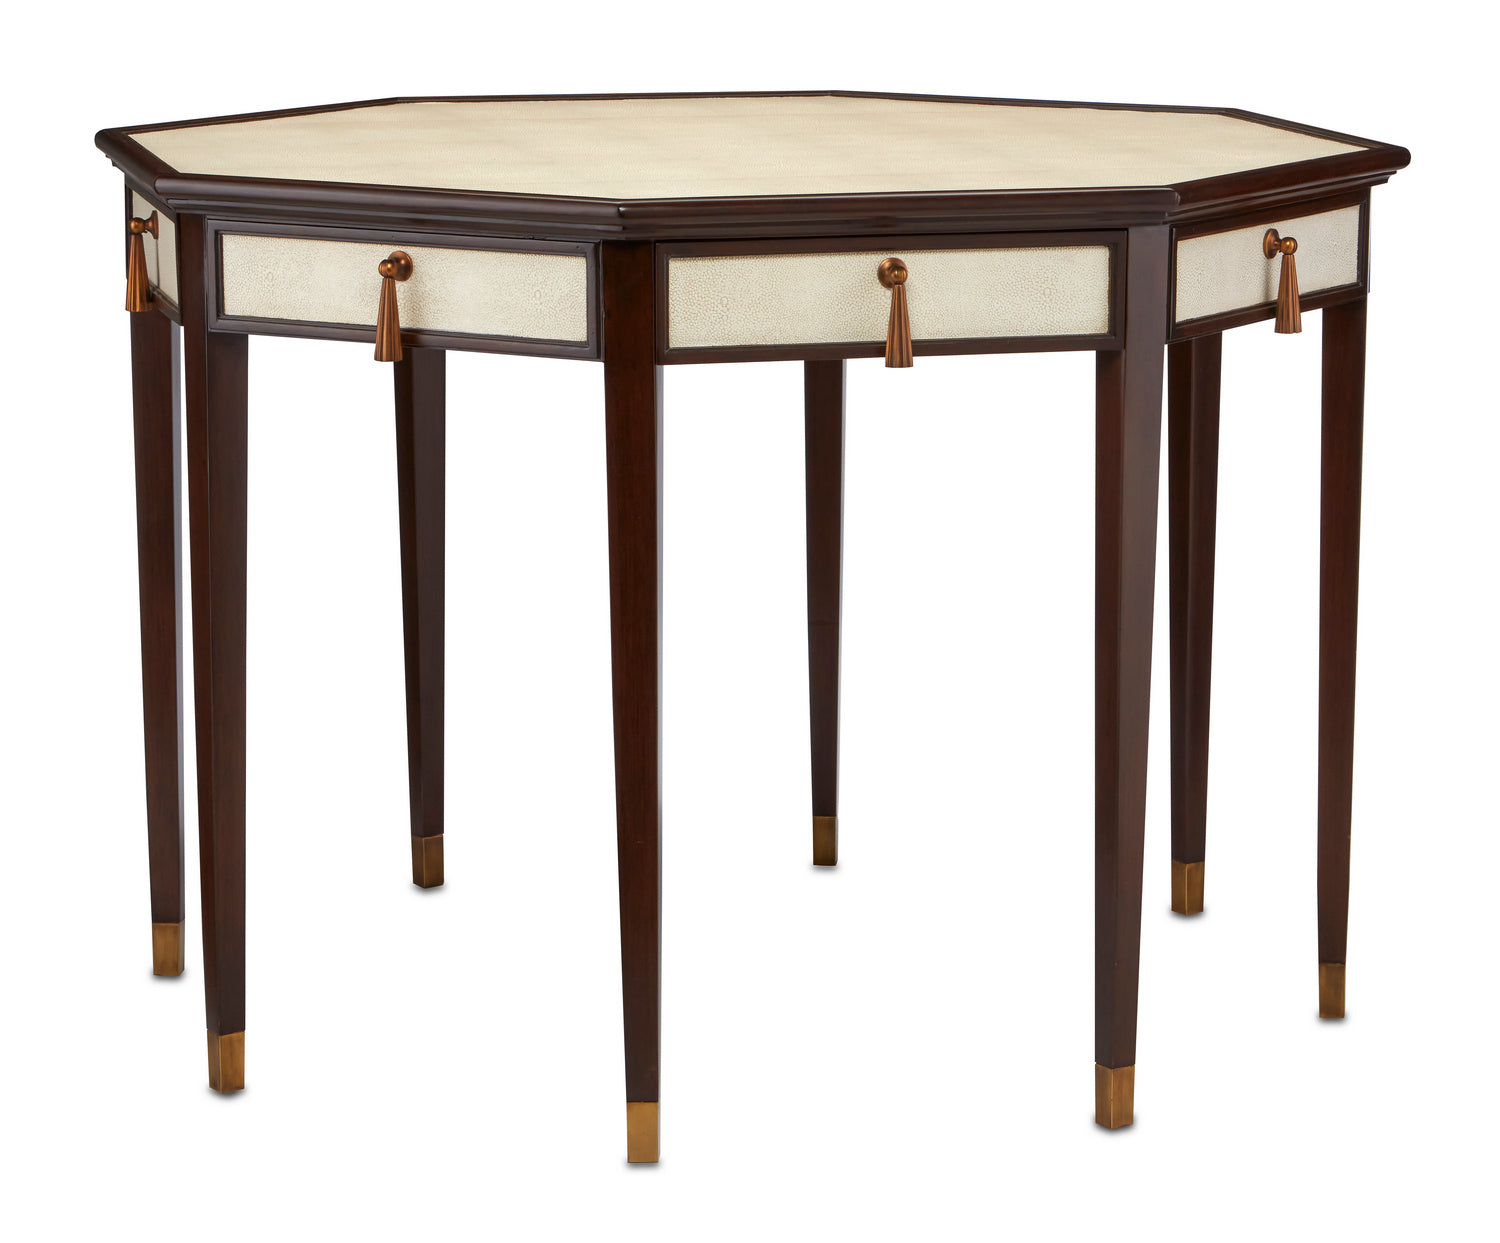 Entry Table from the Evie collection in Ivory/Dark Walnut/Brass finish